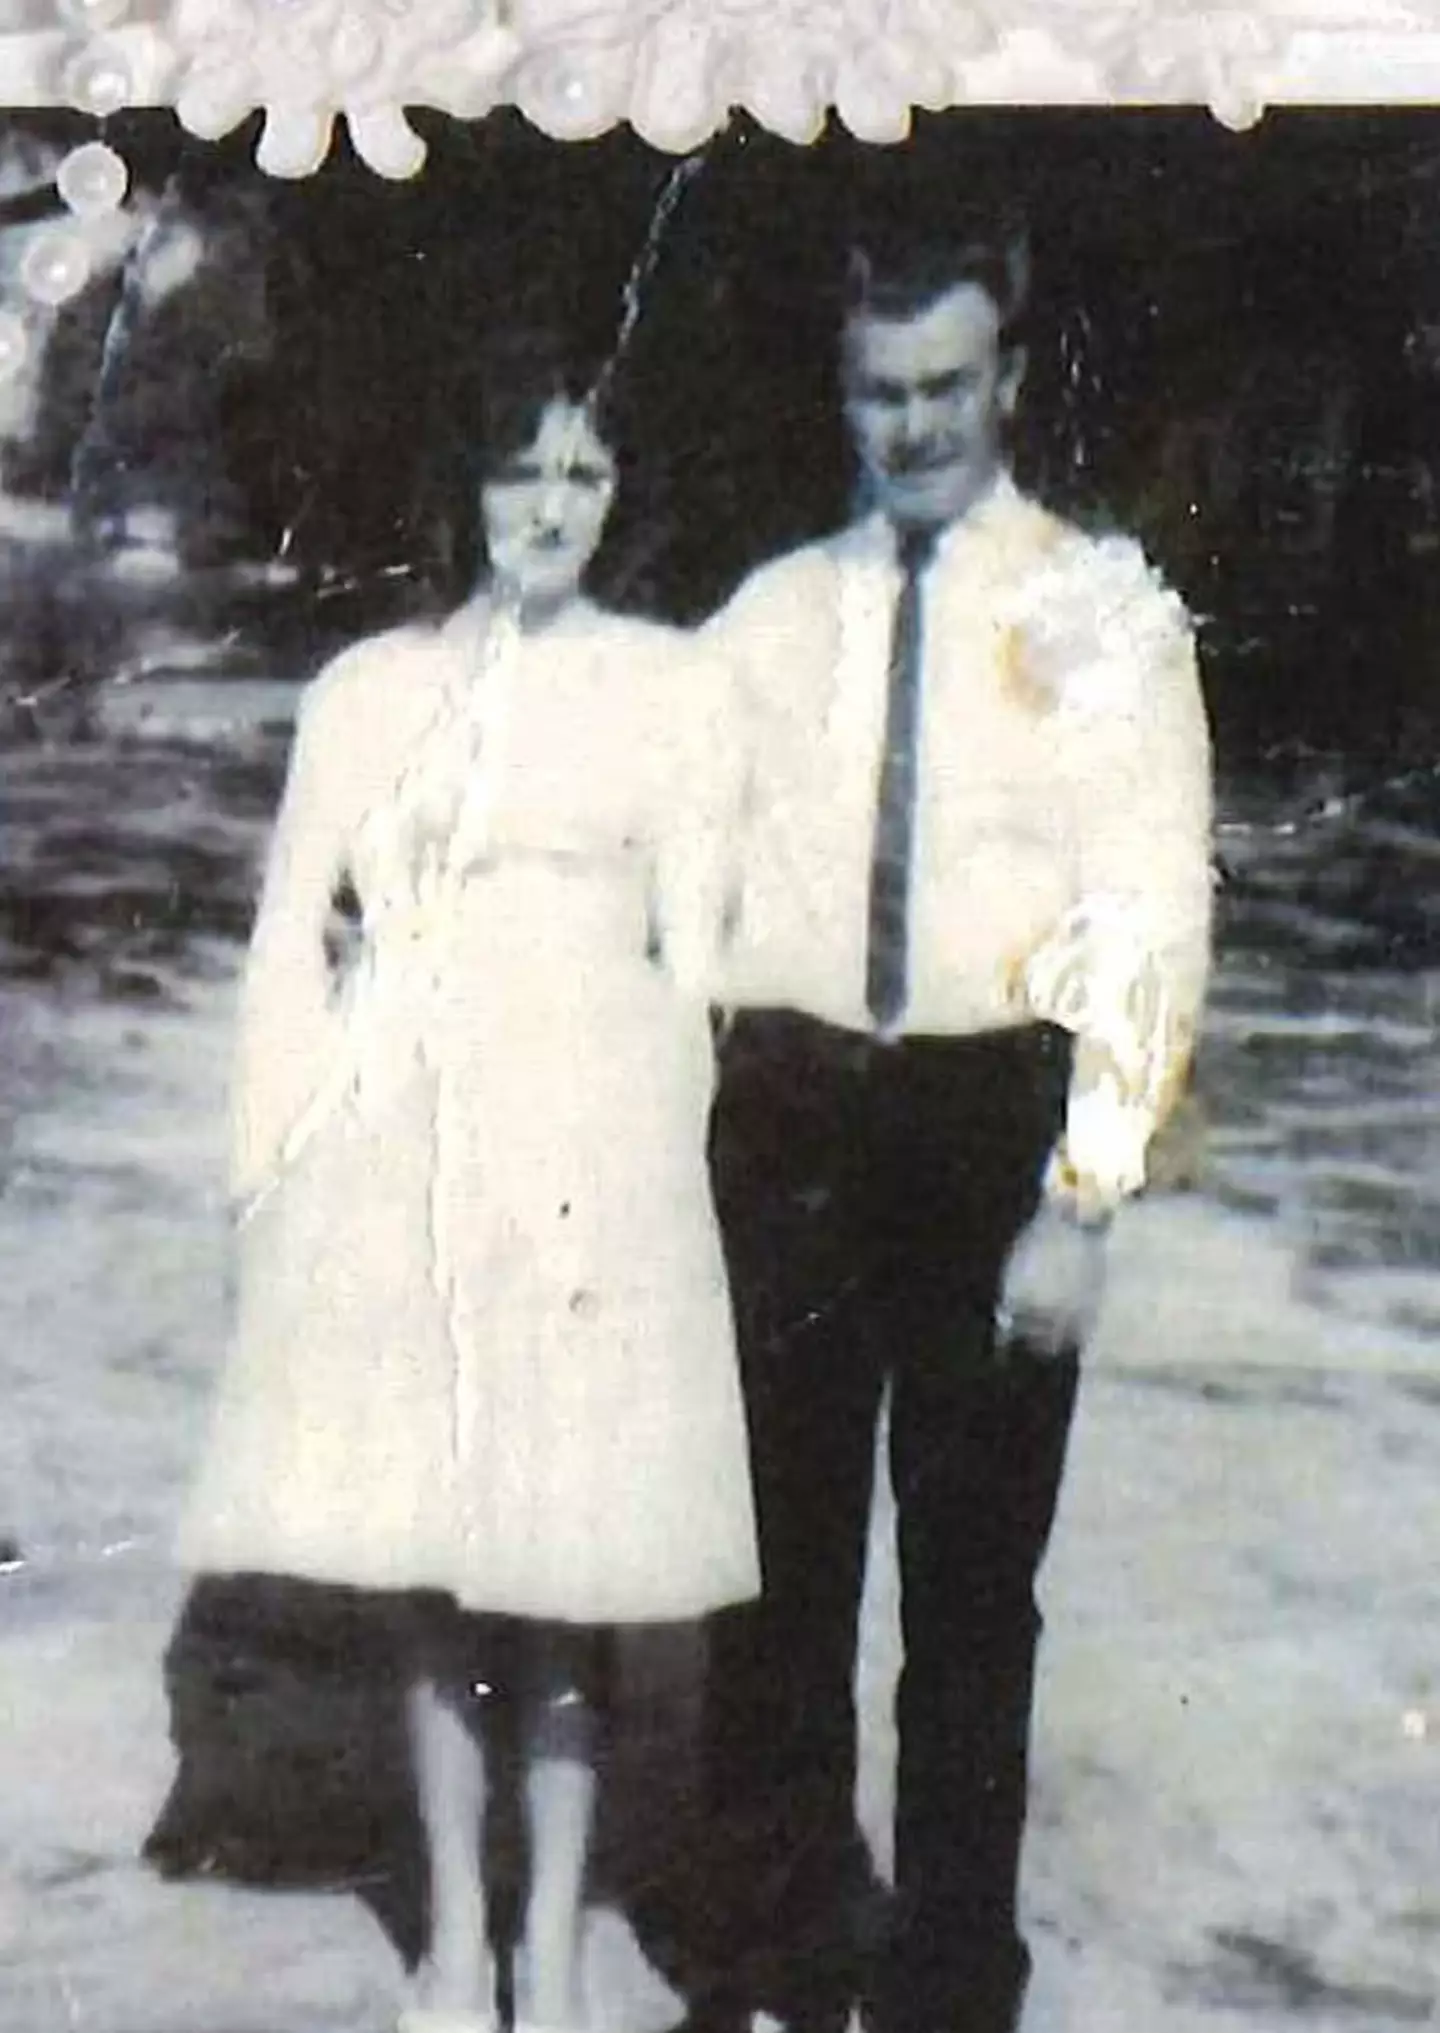 Melvin and Voncile Hill on their wedding day.